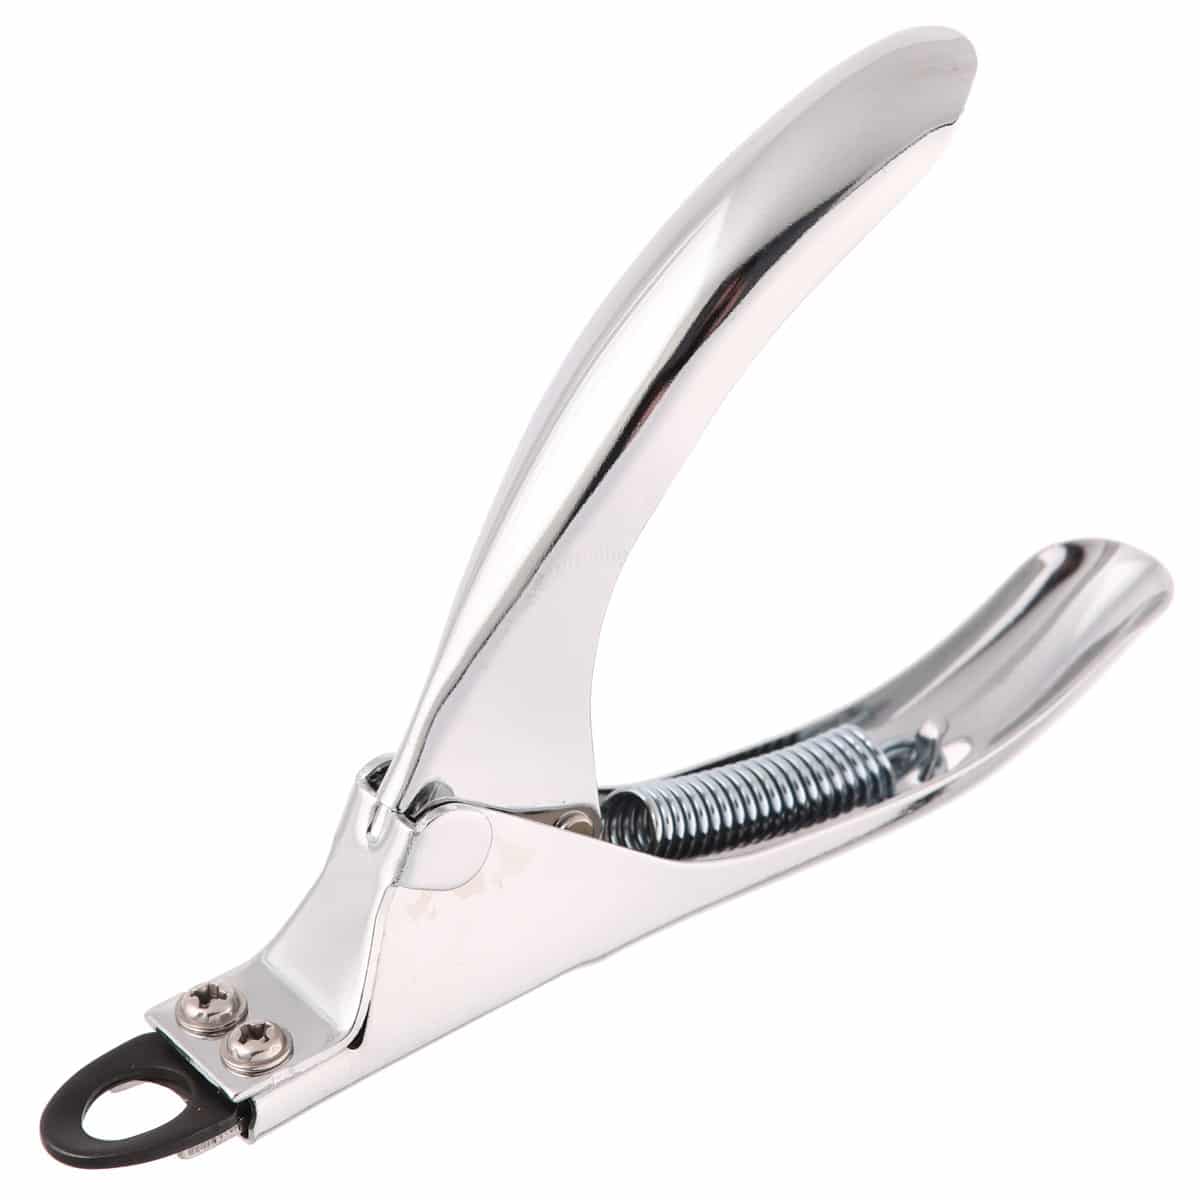 https://www.petstore.direct/wp-content/uploads/2020/12/Groom-Professional-guillotine-nail-clippers-grooming.jpg